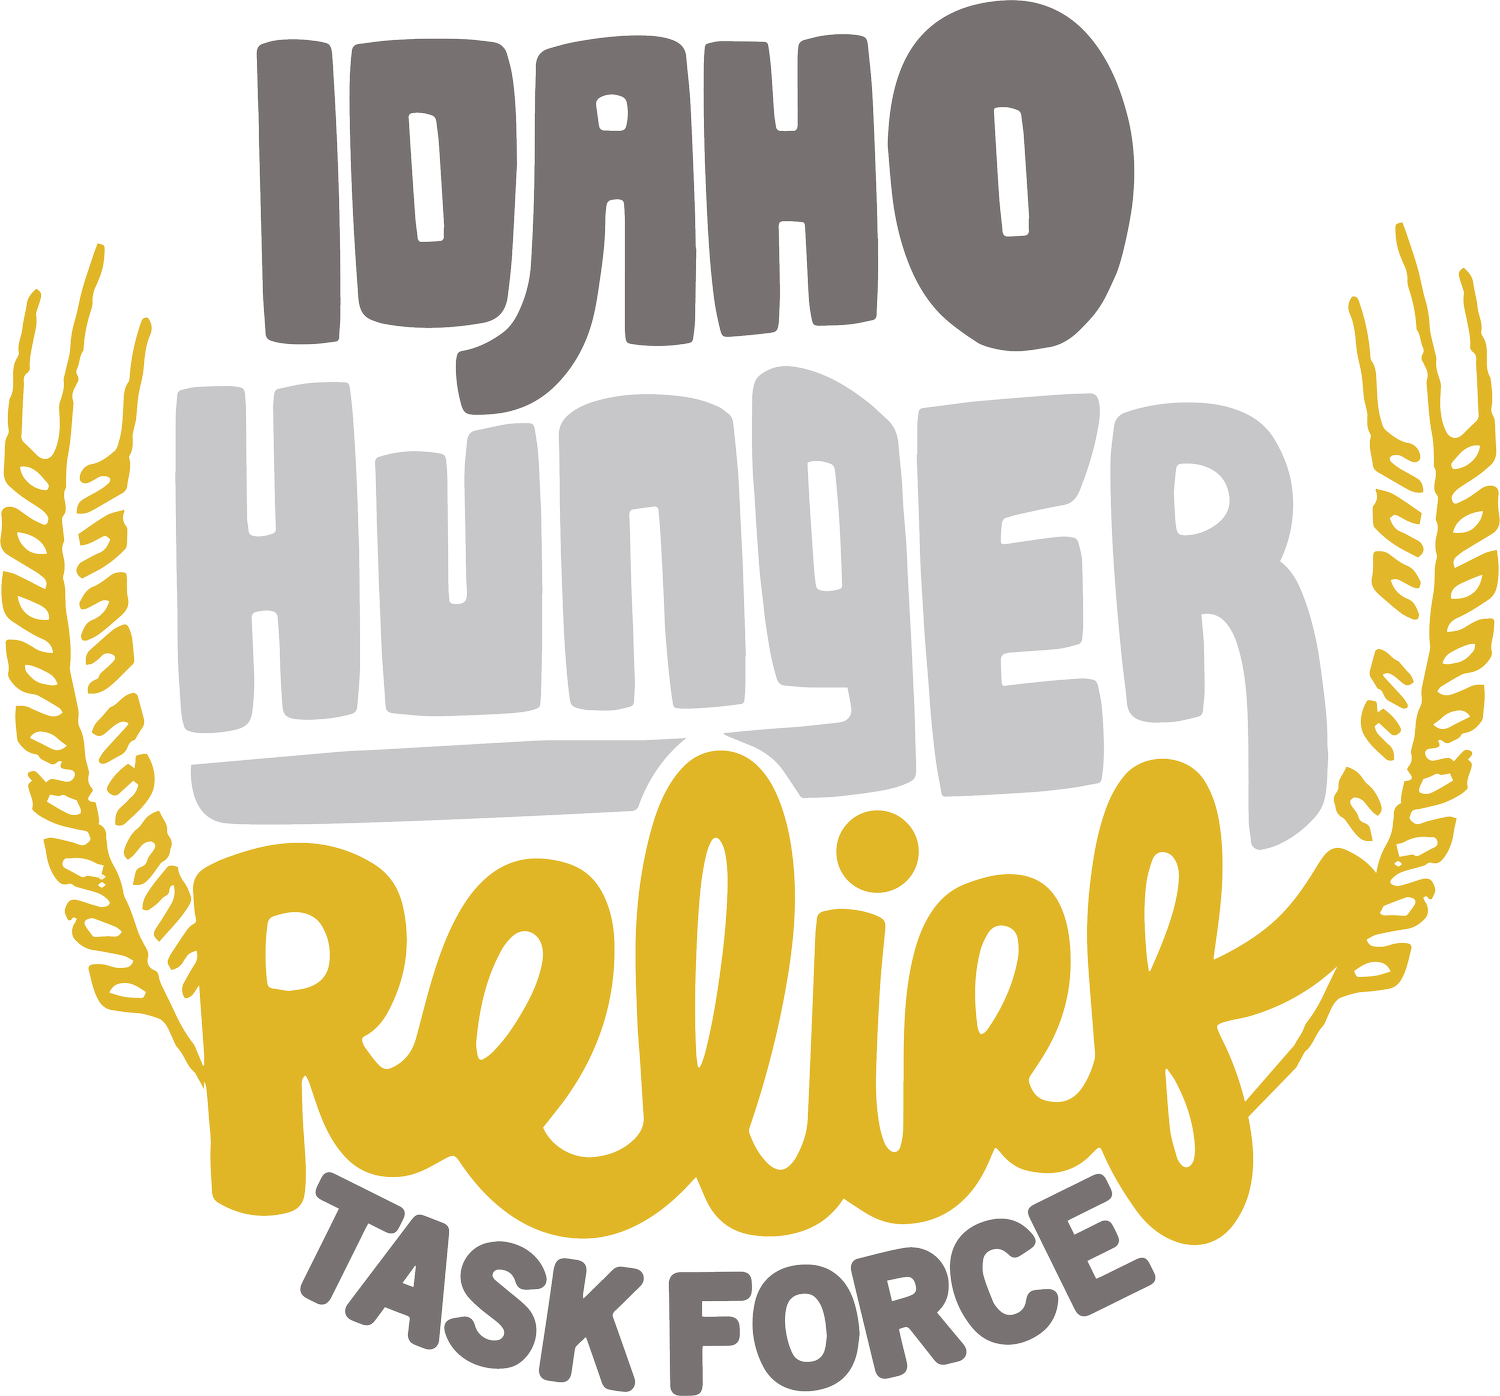 Idaho Hunger Relief Task Force